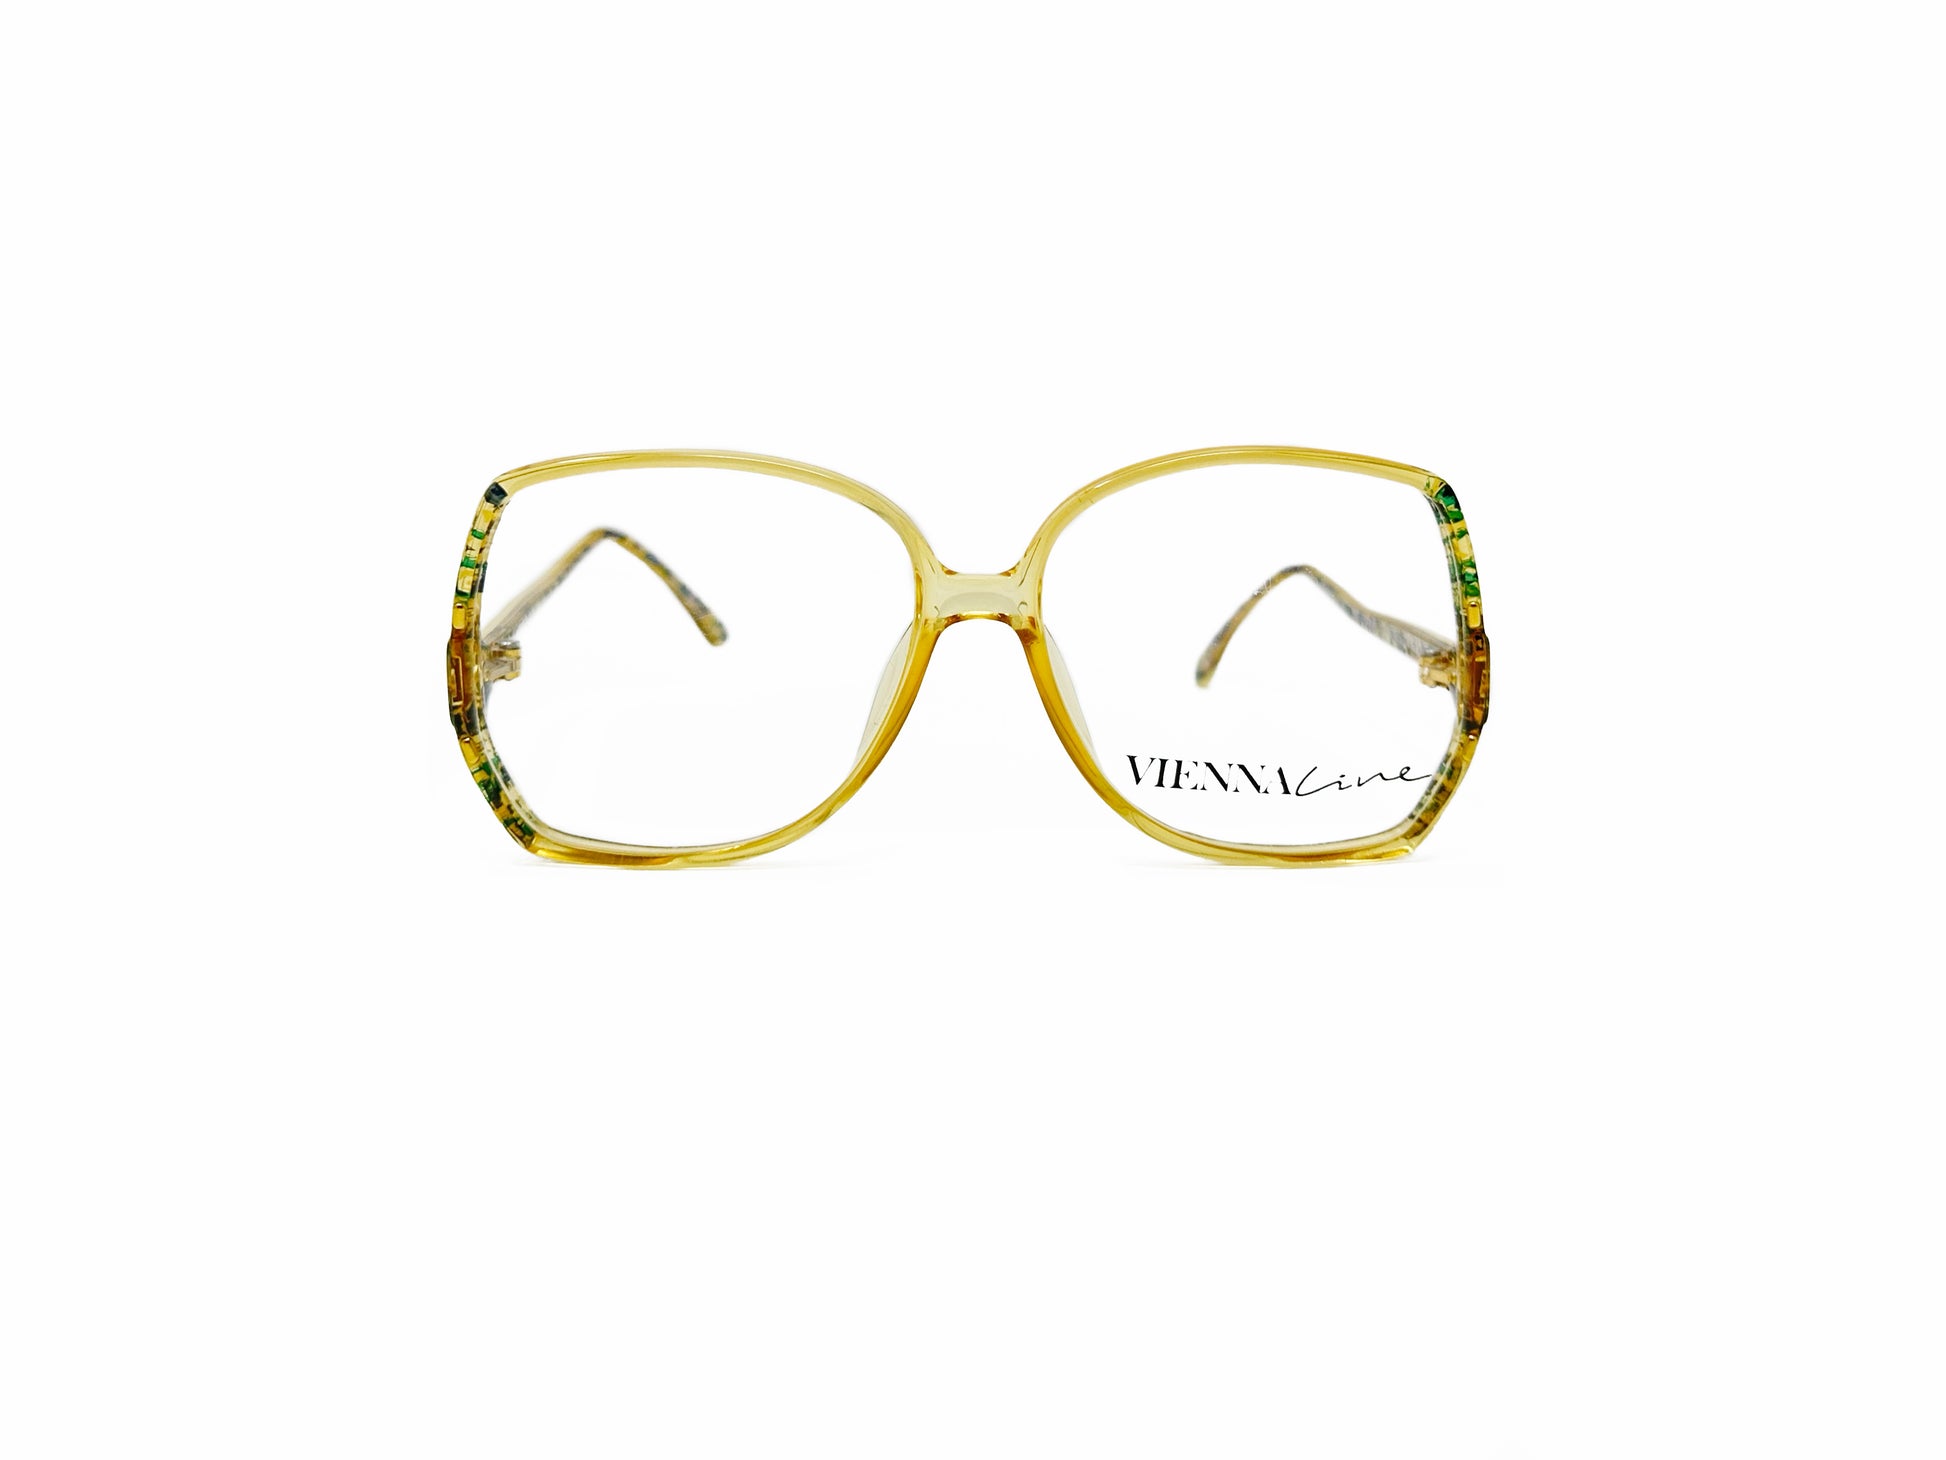 Vienna Cine oversized, acetate, butterfly optical frame. Model: 1563. Color: 60 yellow with green accents. Front view. 